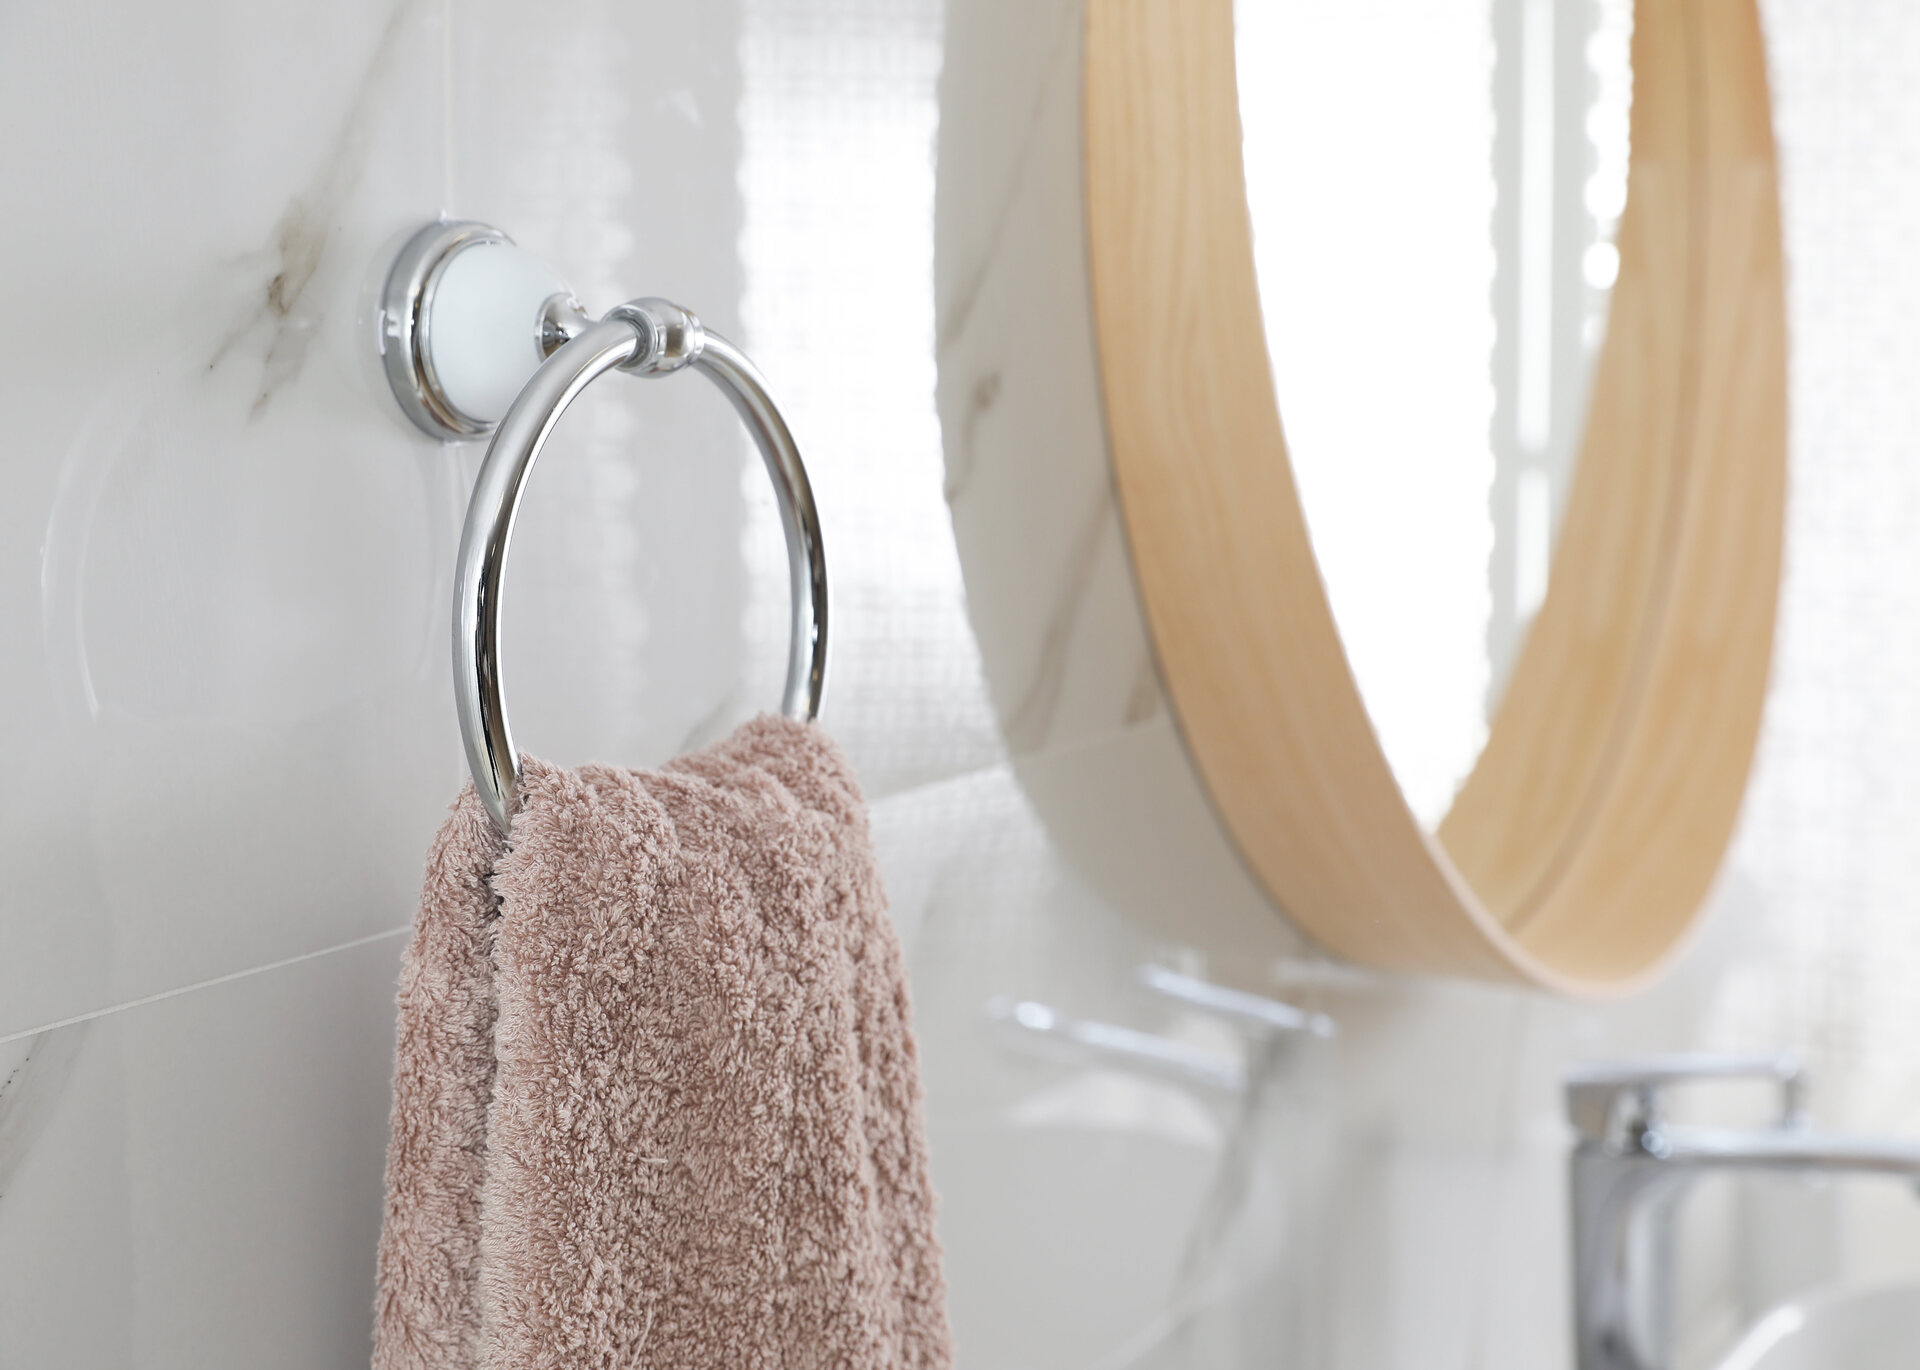 How To Install Bathroom Towel Ring